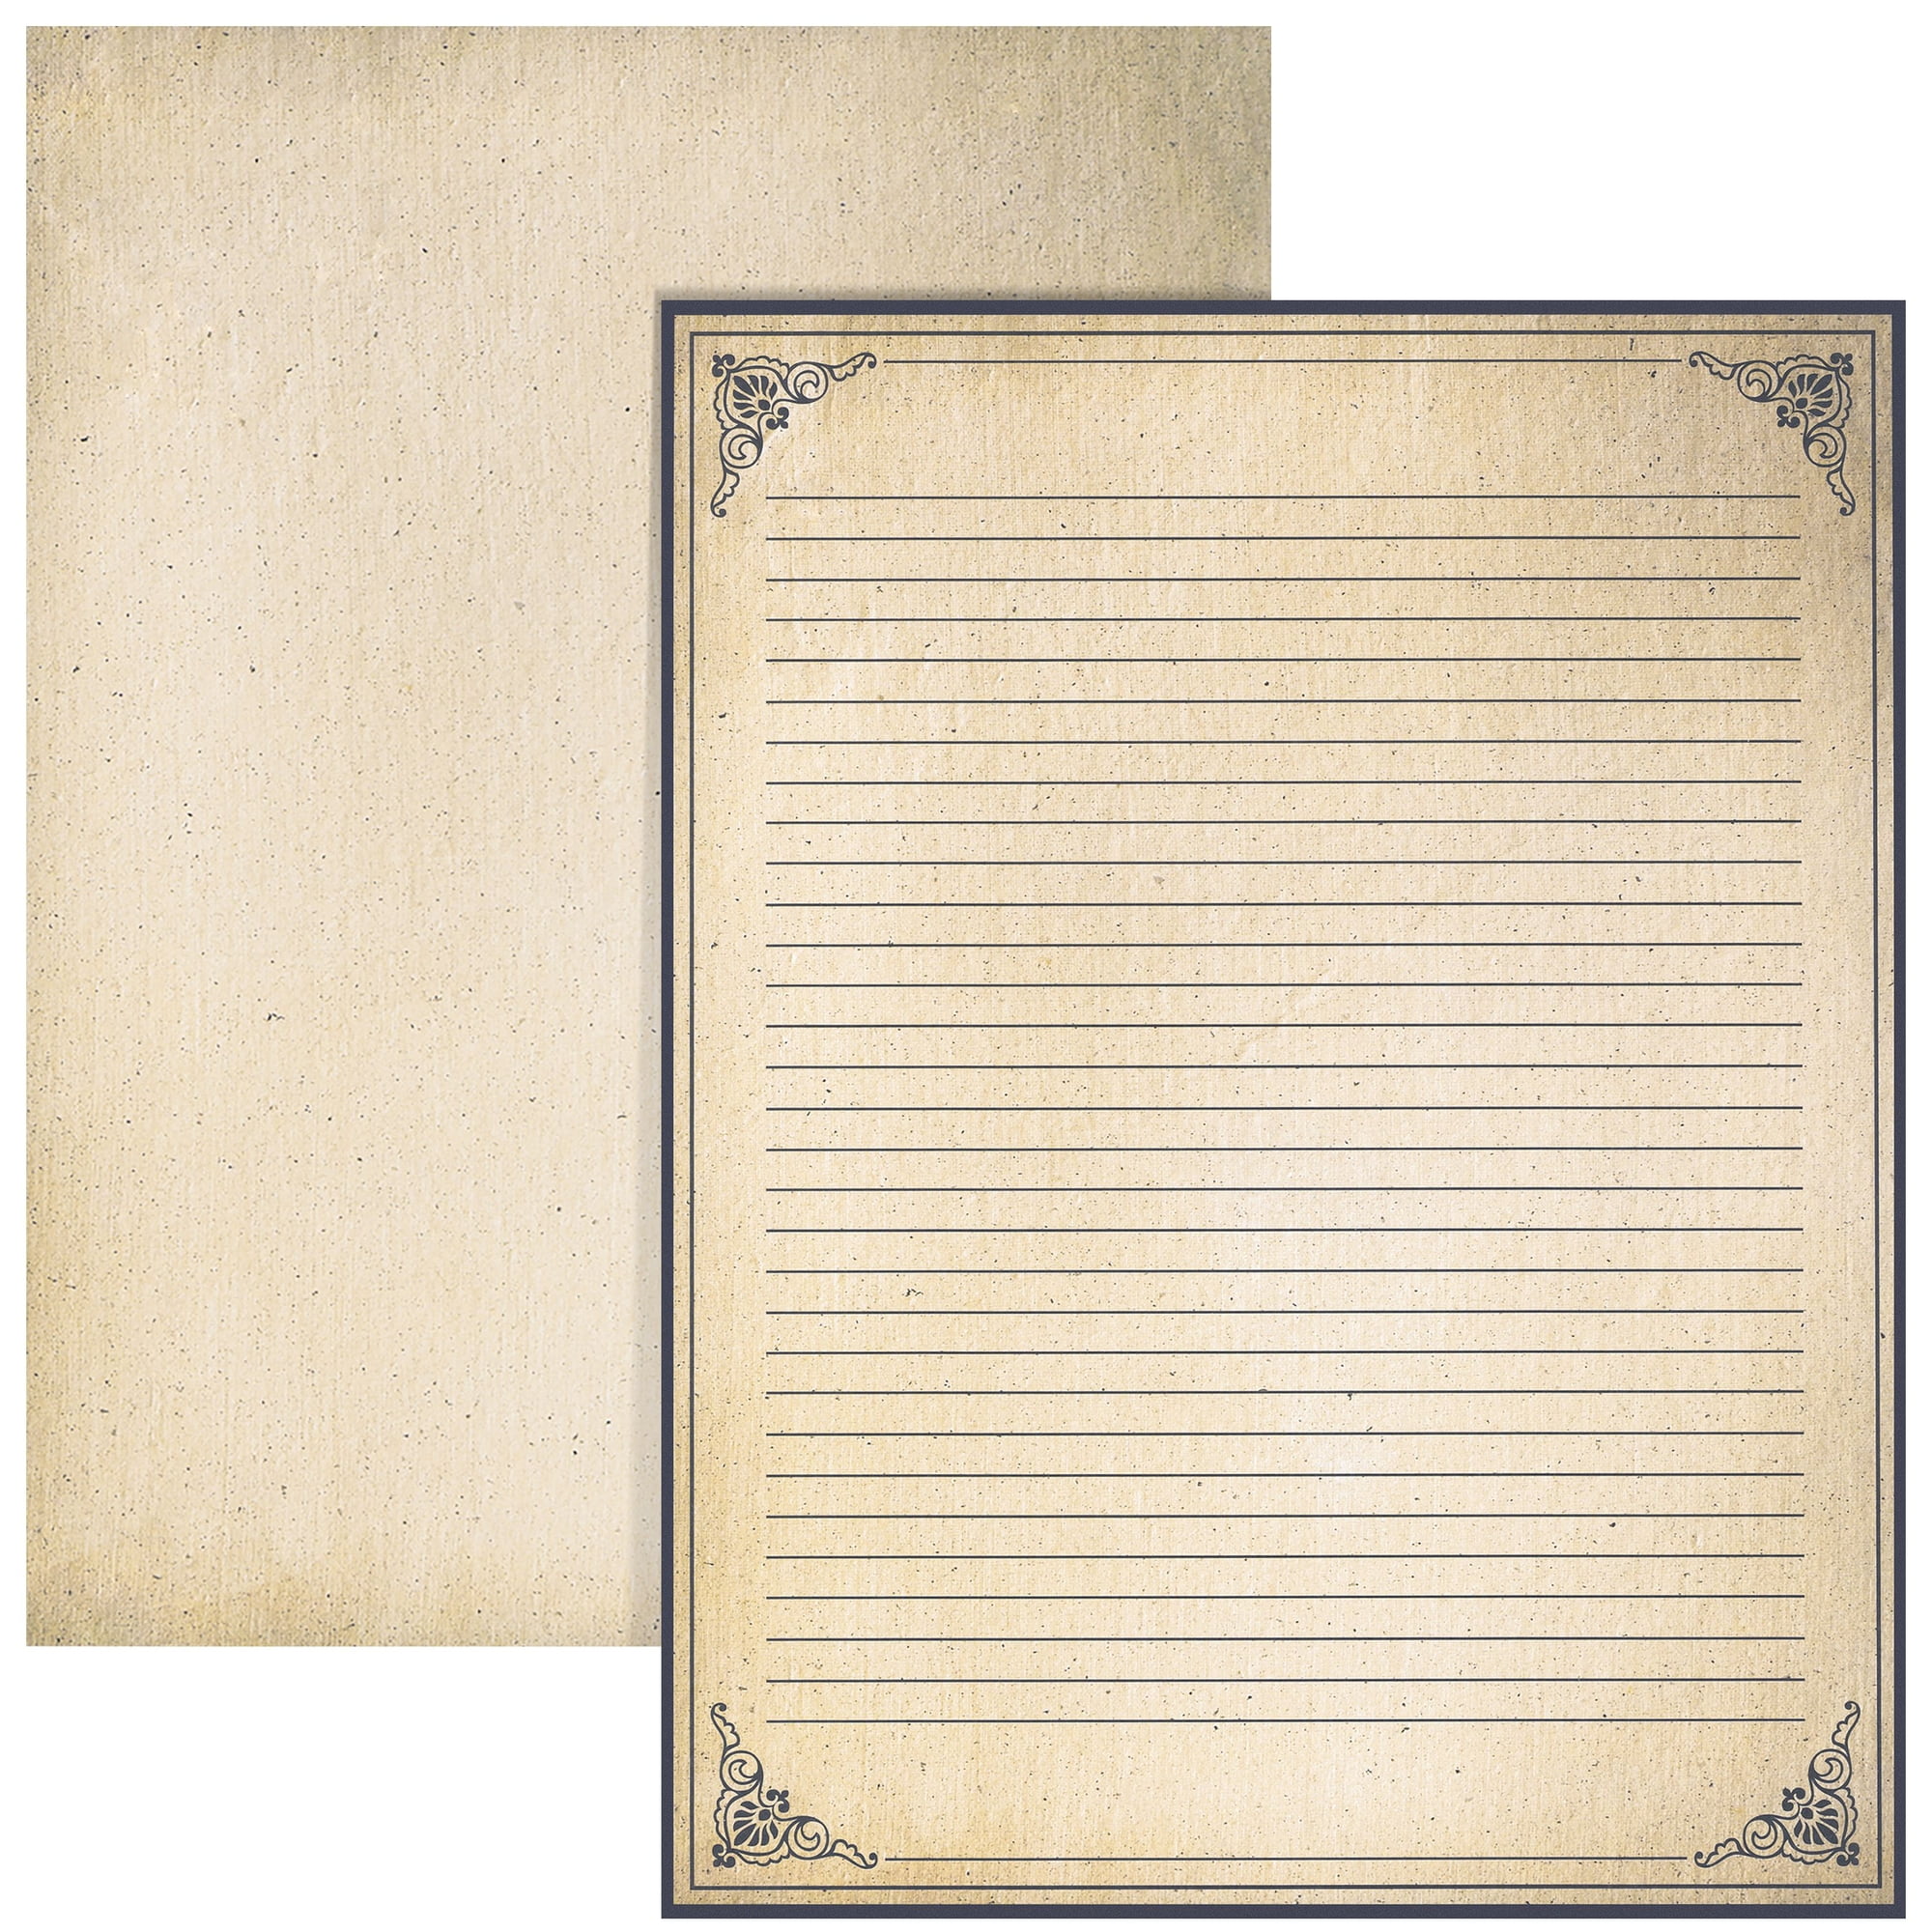 48 Sheets Fancy Vintage Style Lined Letter Writing Paper with Antique  Border Design, 8.5 x 11 Inch Aged Stationery for Letters, Invitations 